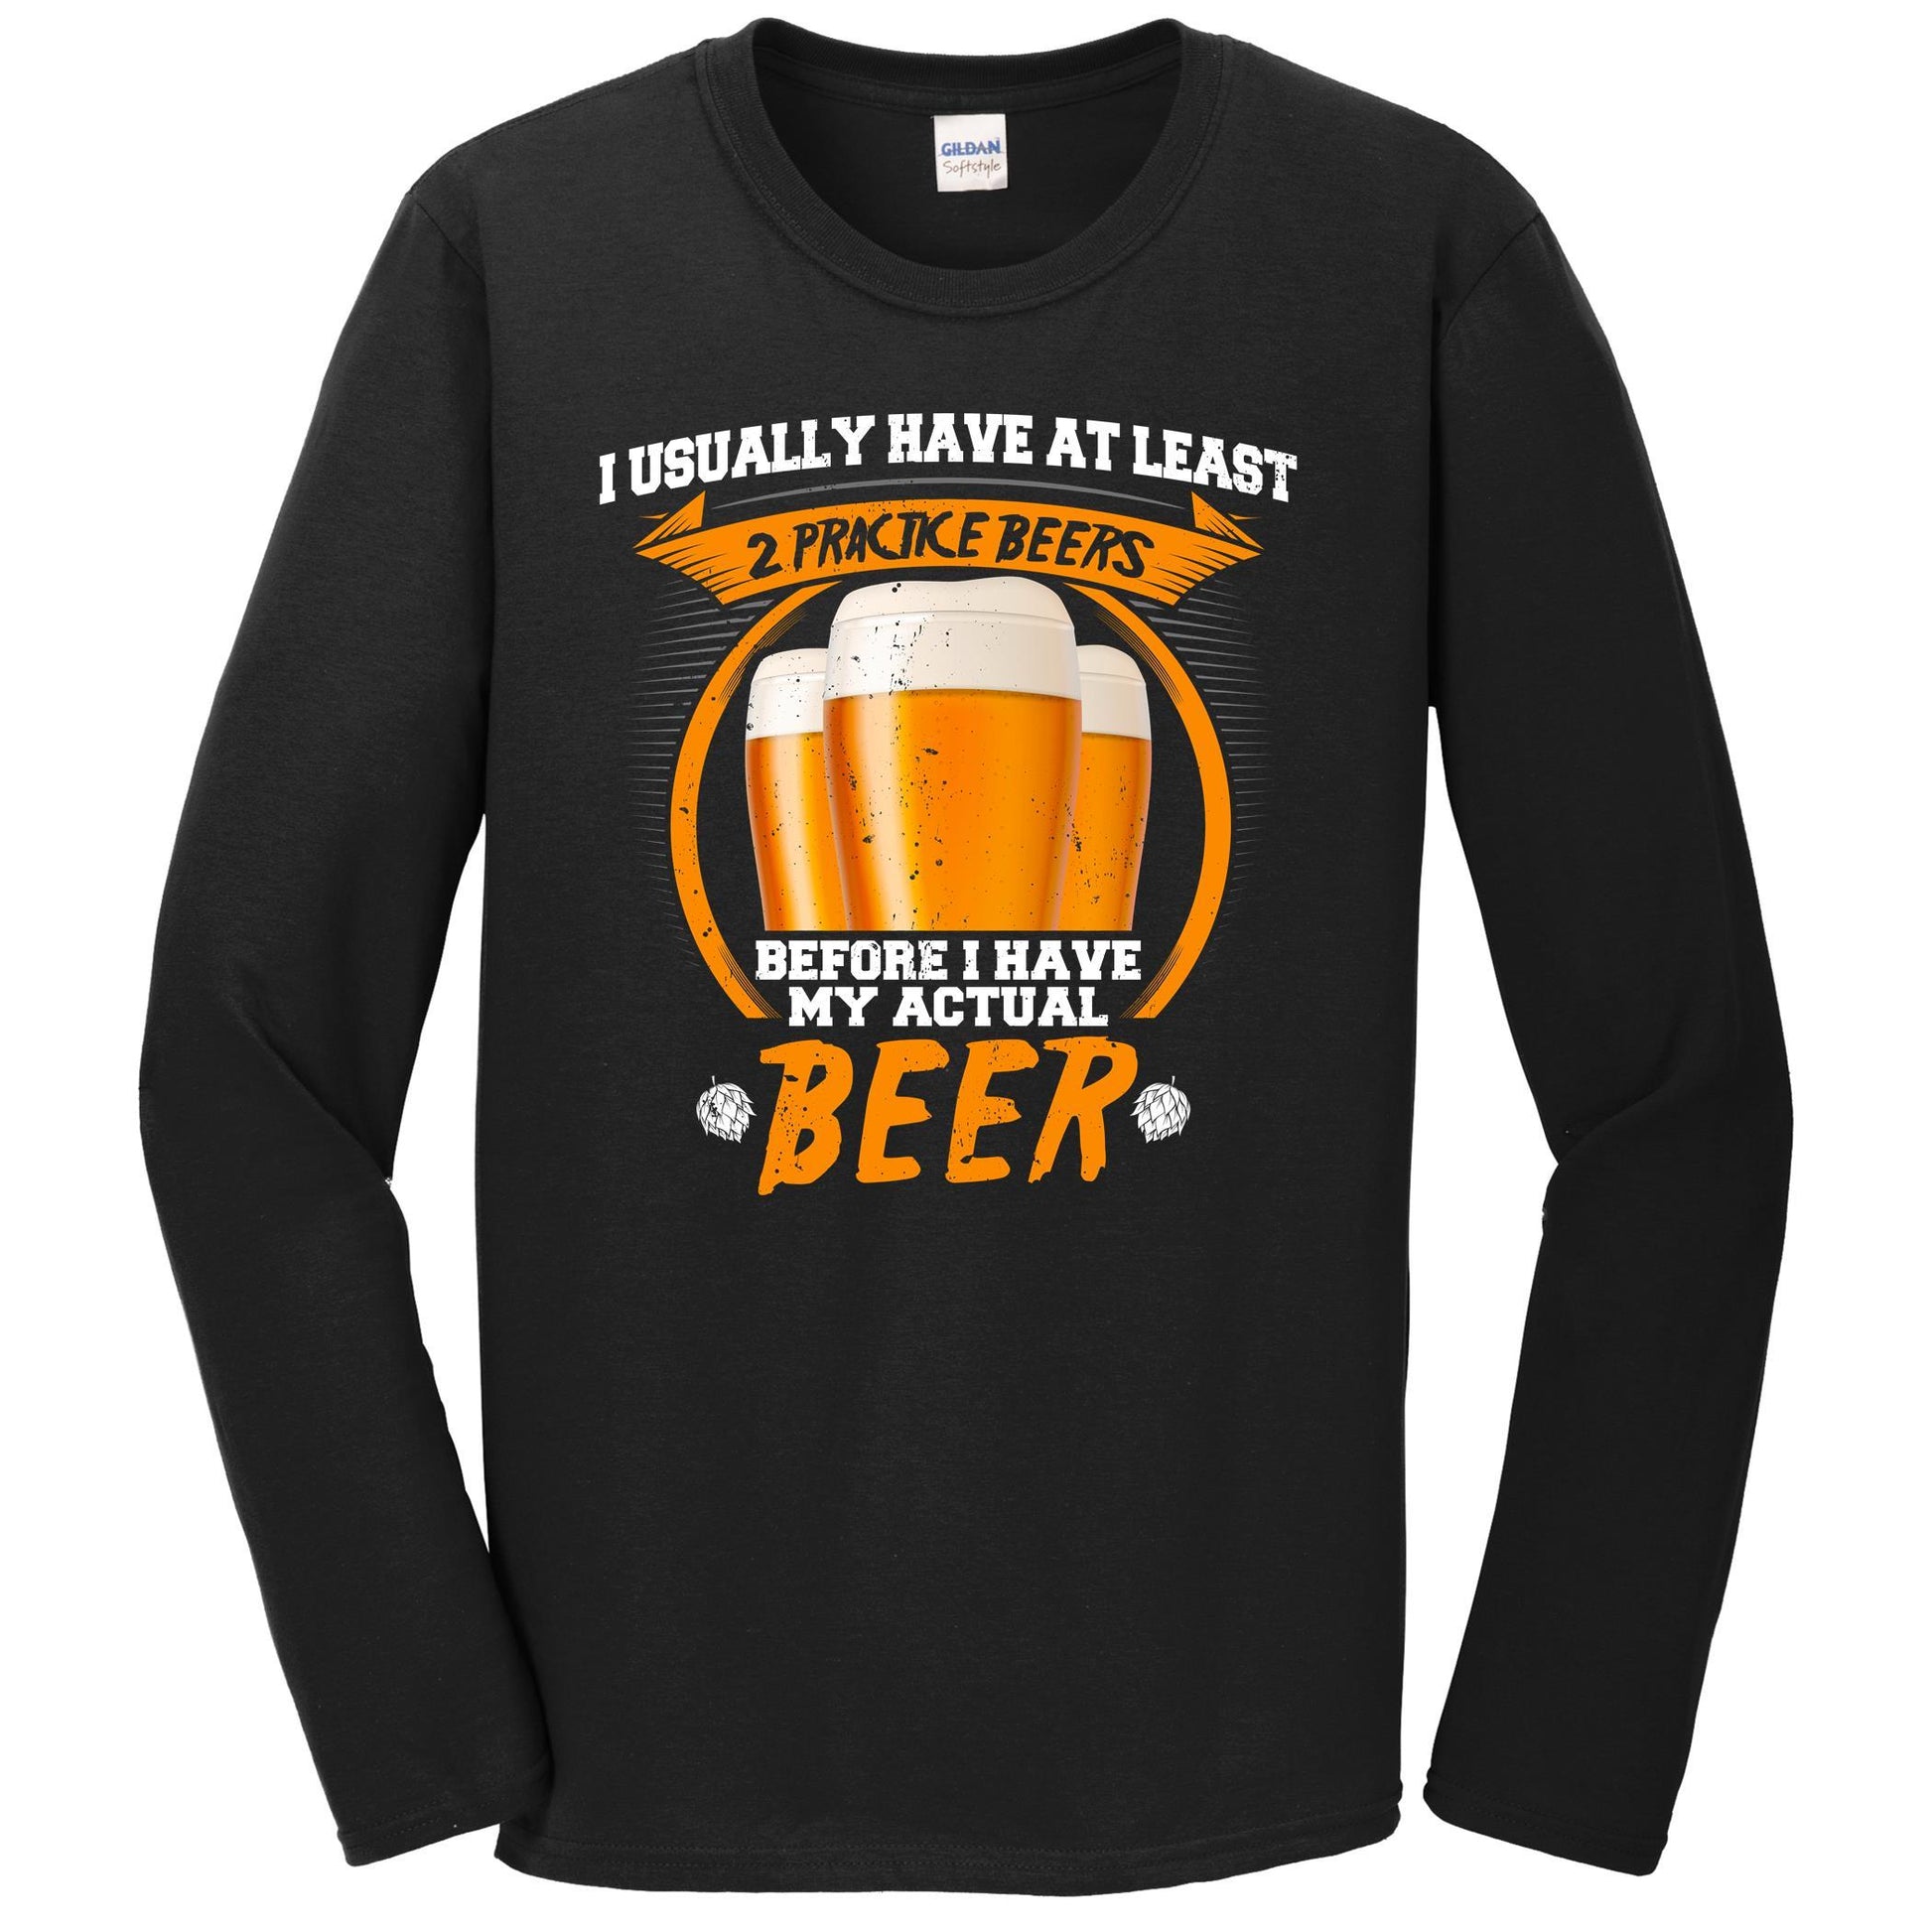 I Usually Have At Least 2 Practice Beers Before I Have My Actual Beer Long Sleeve T-Shirt